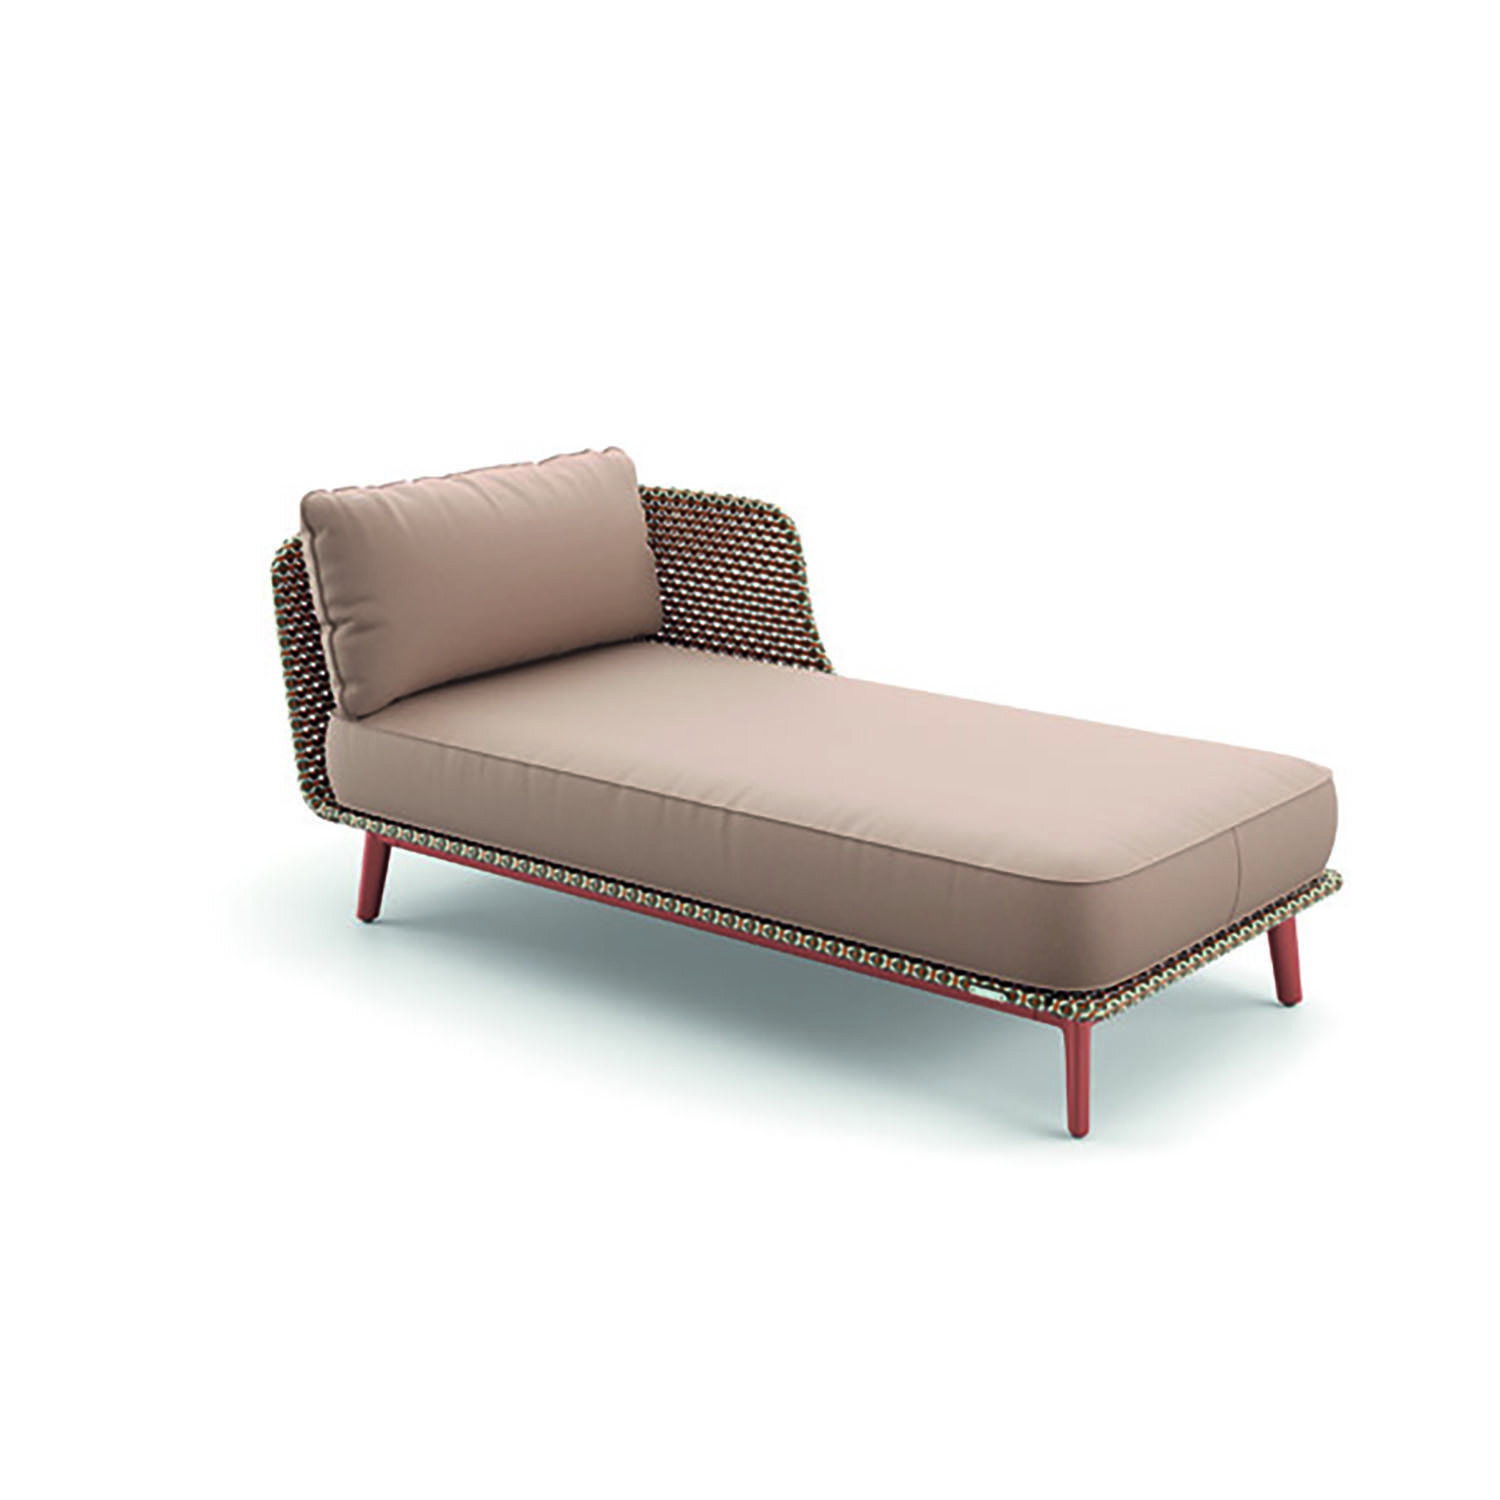 MBARQ_Daybed_left_chestnut.jpg